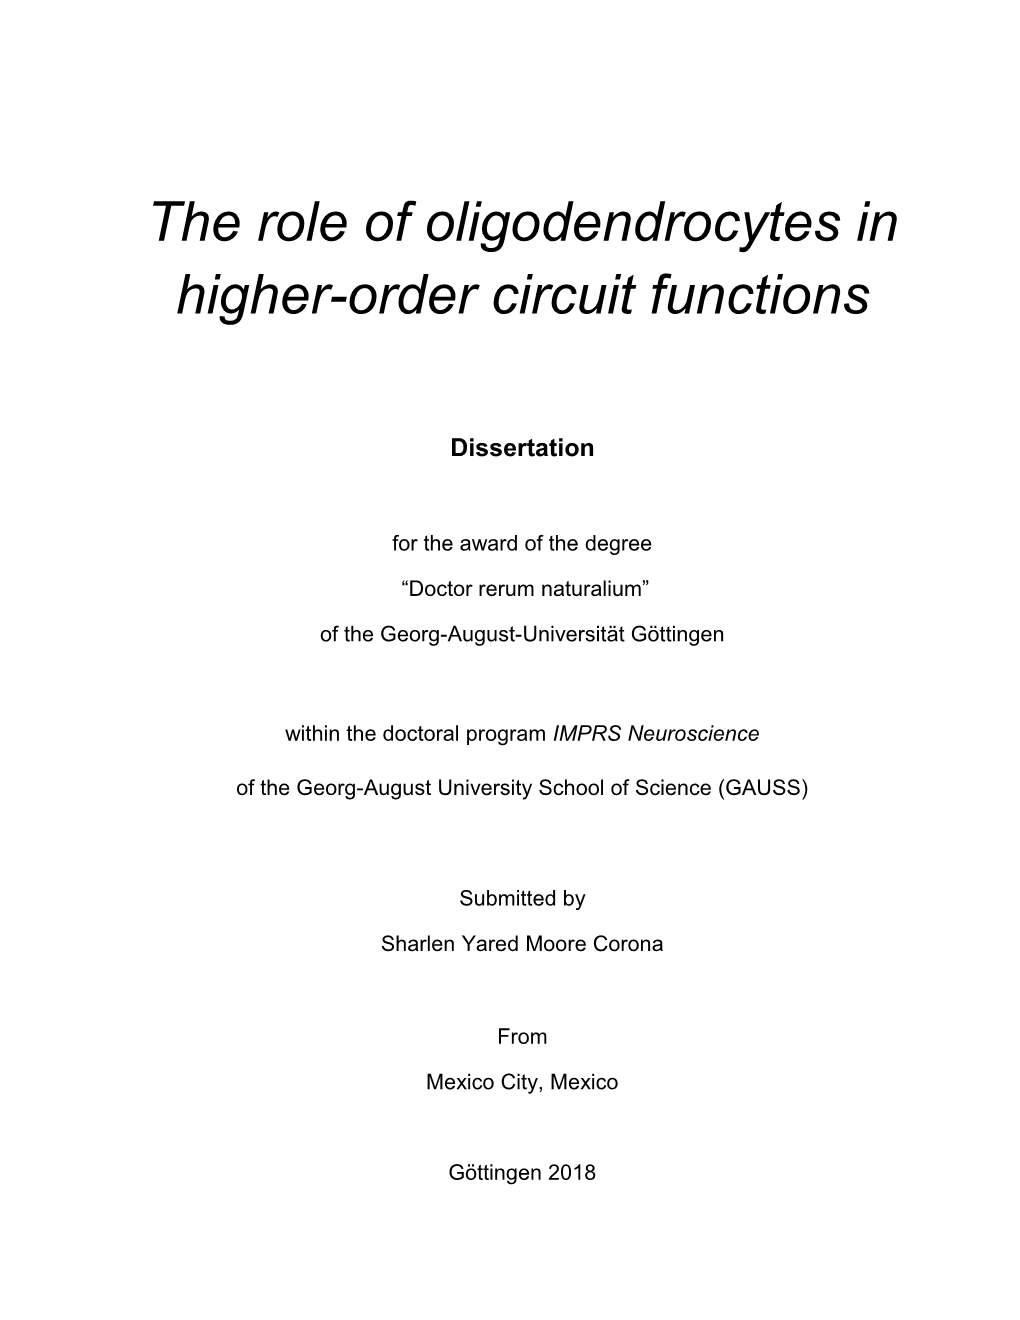 The Role of Oligodendrocytes in Higher-Order Circuit Functions